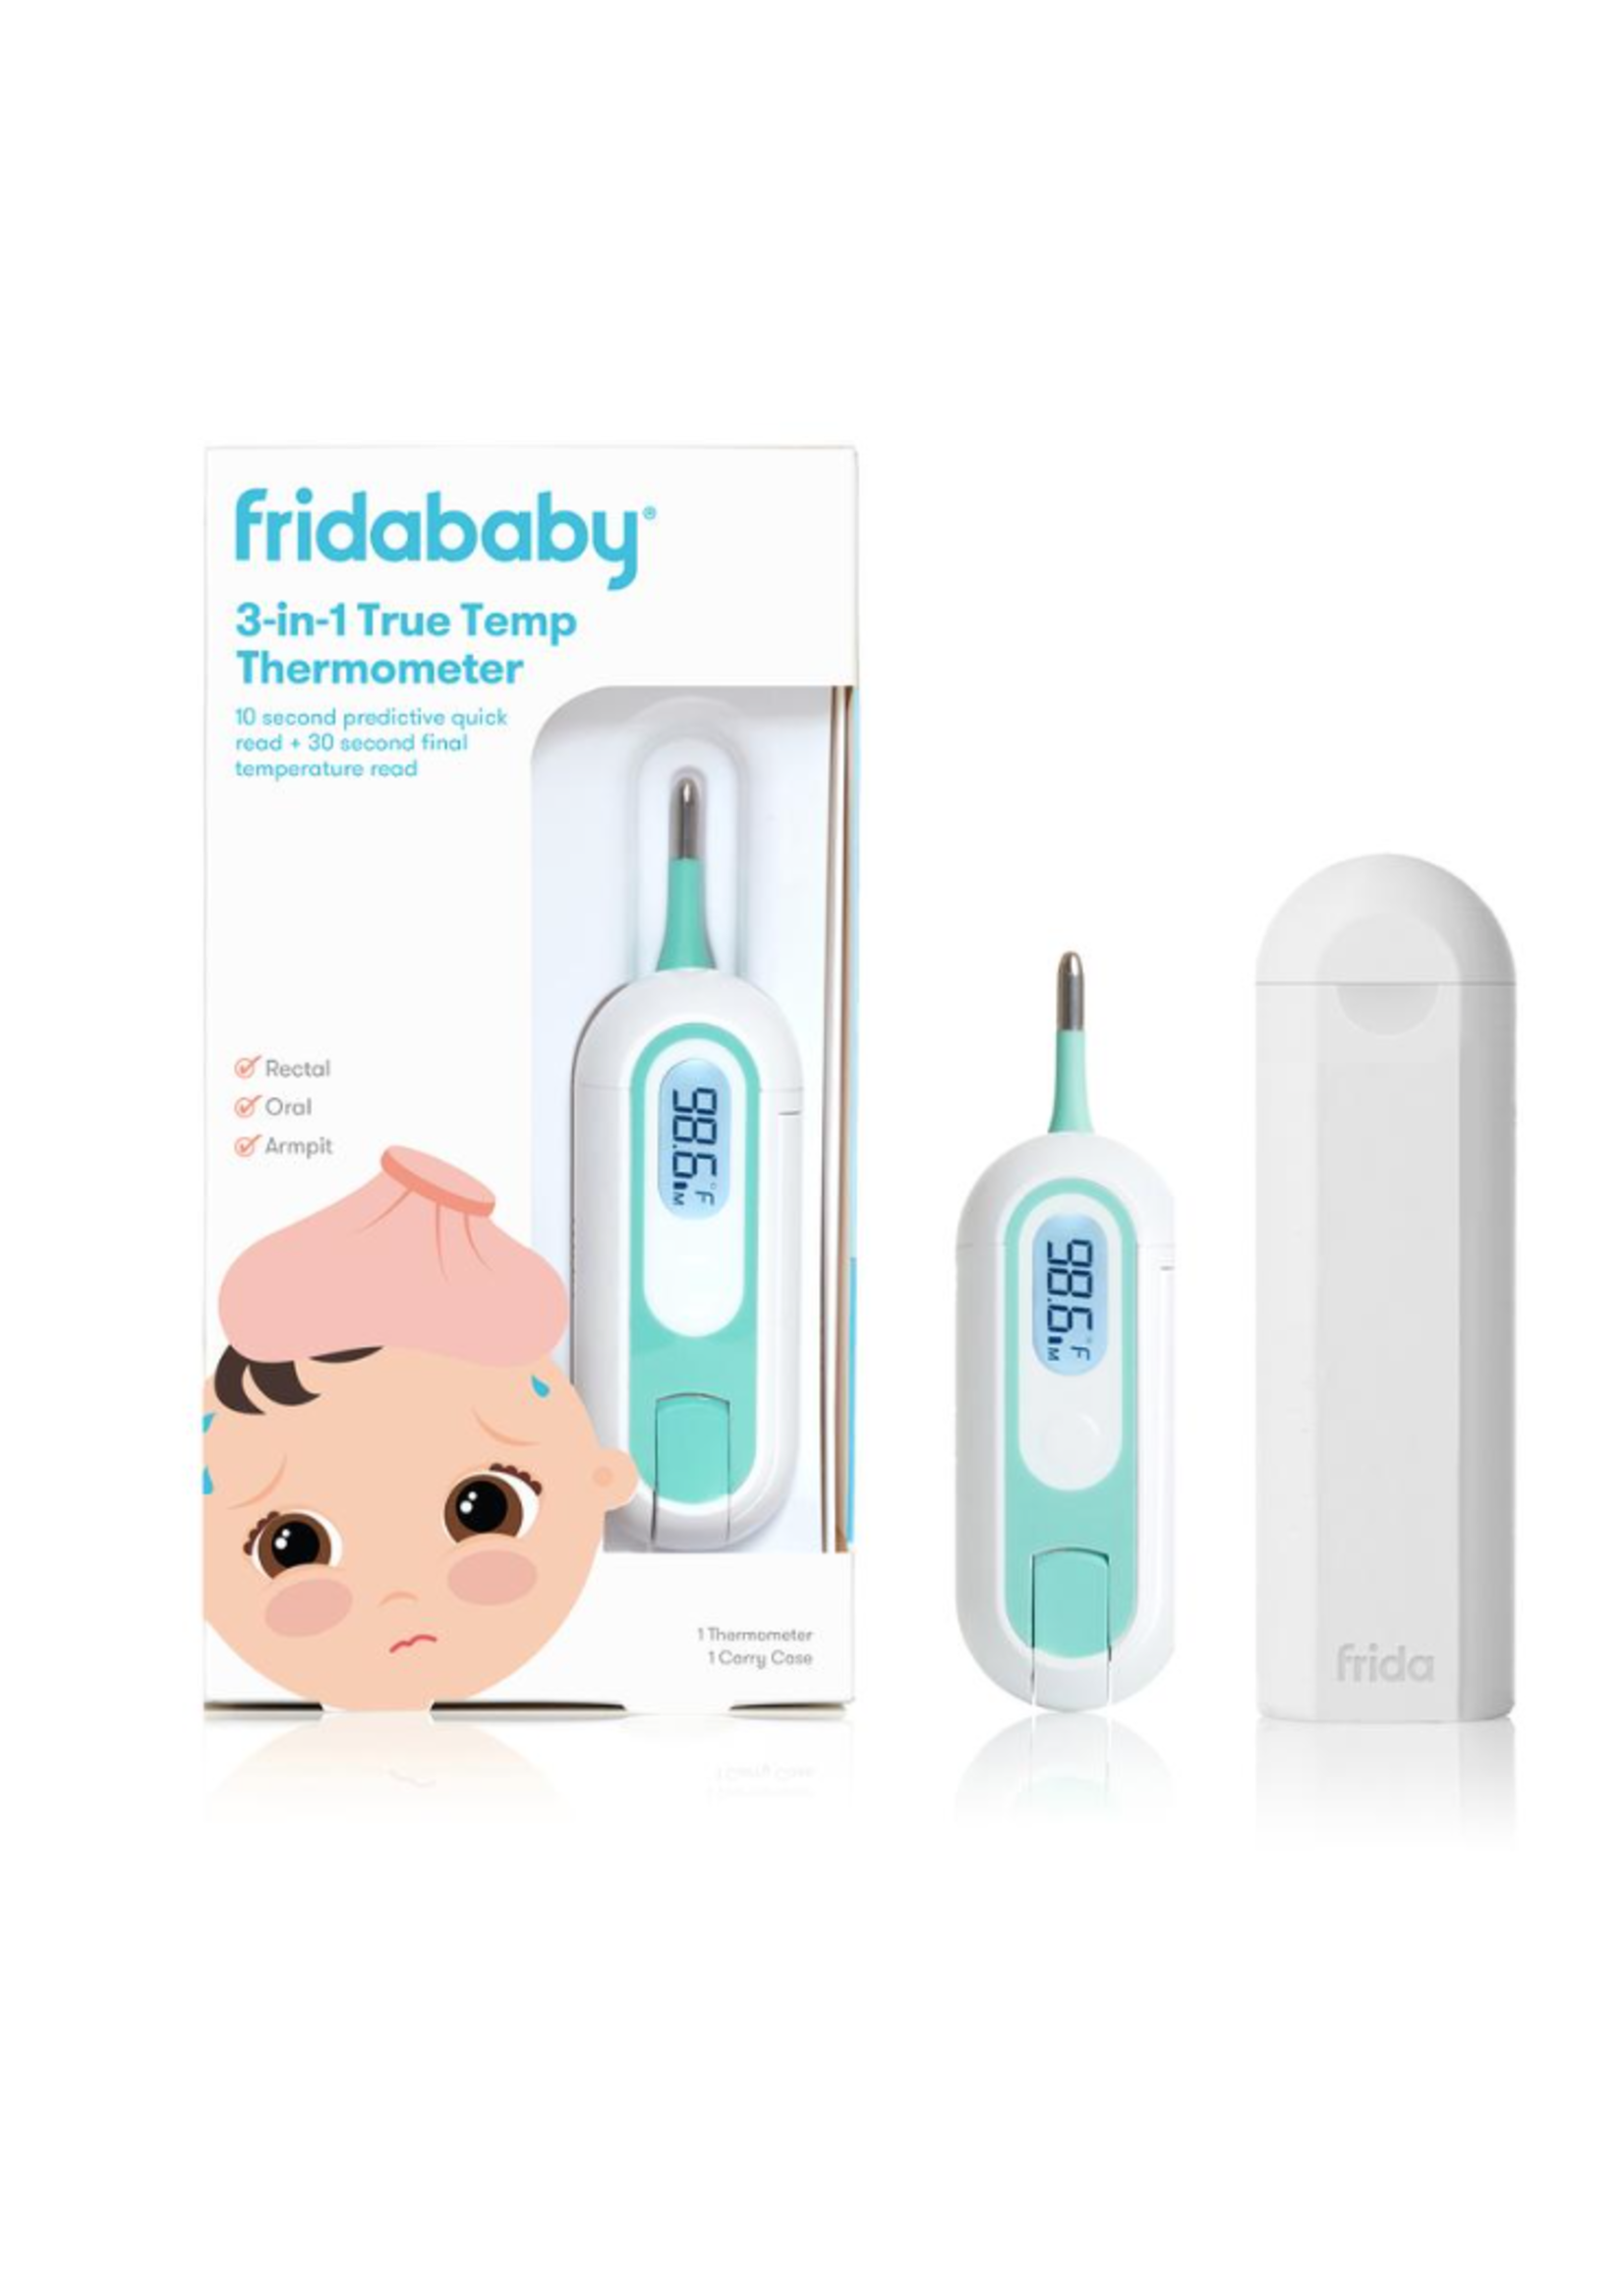 Fridababy Fridababy, 3-in-1 True Temp Thermometer